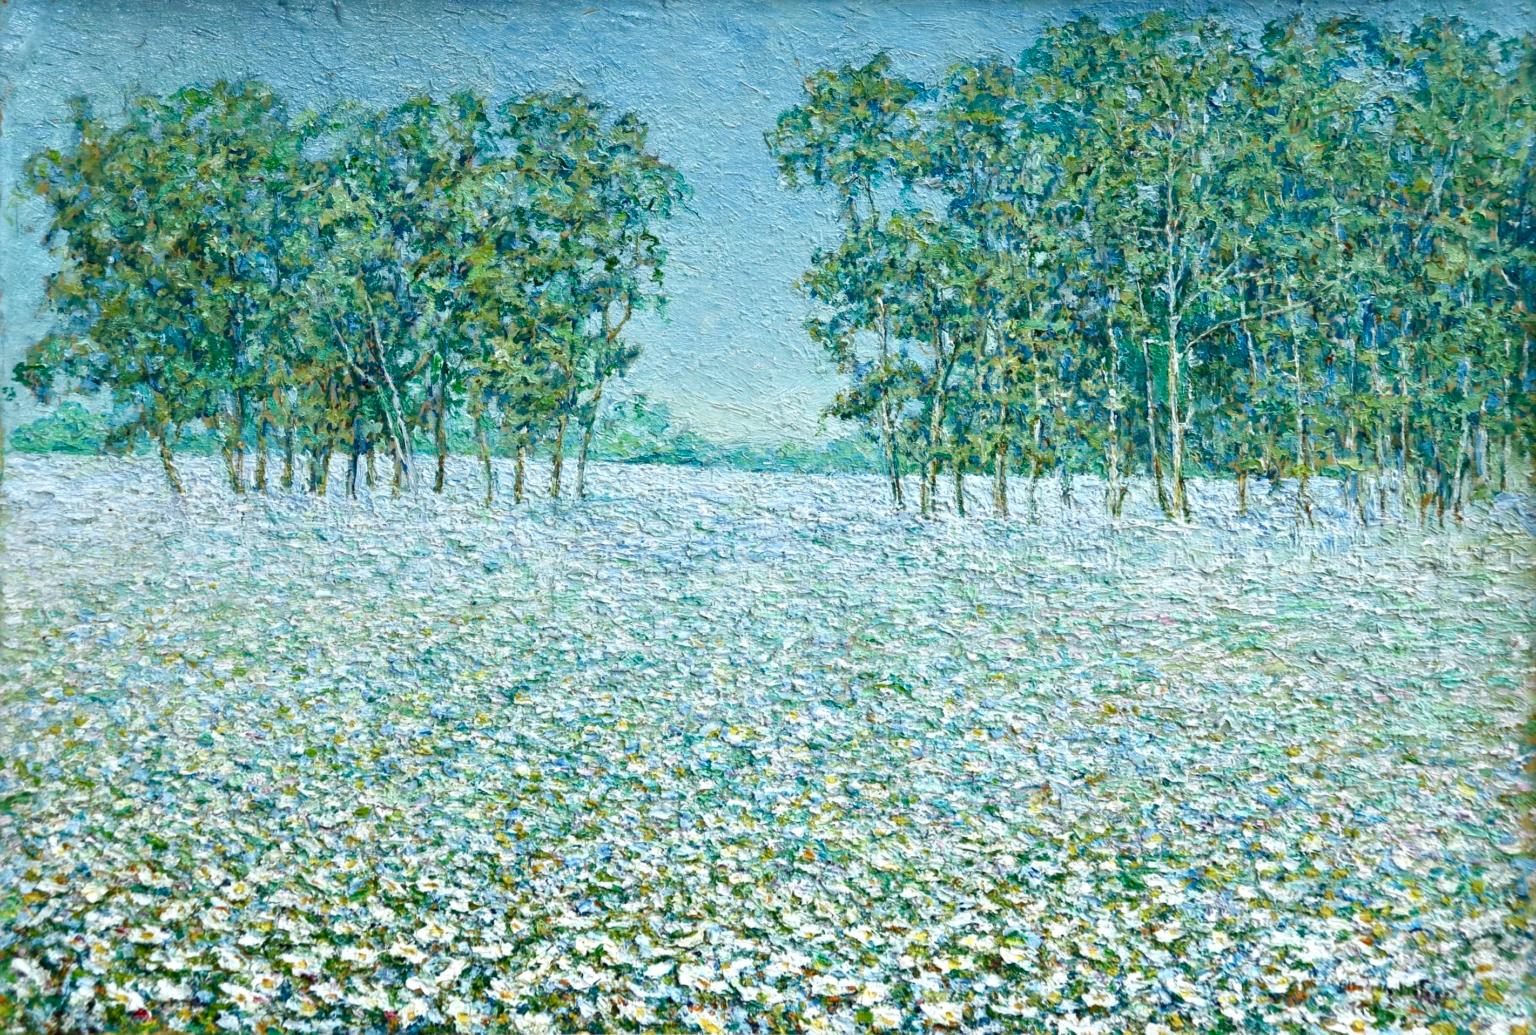 Champ de Fleurs - Impressionist Oil, Trees & Flowers in Landscape by B O Malone - Painting by Blondelle Octavia Malone